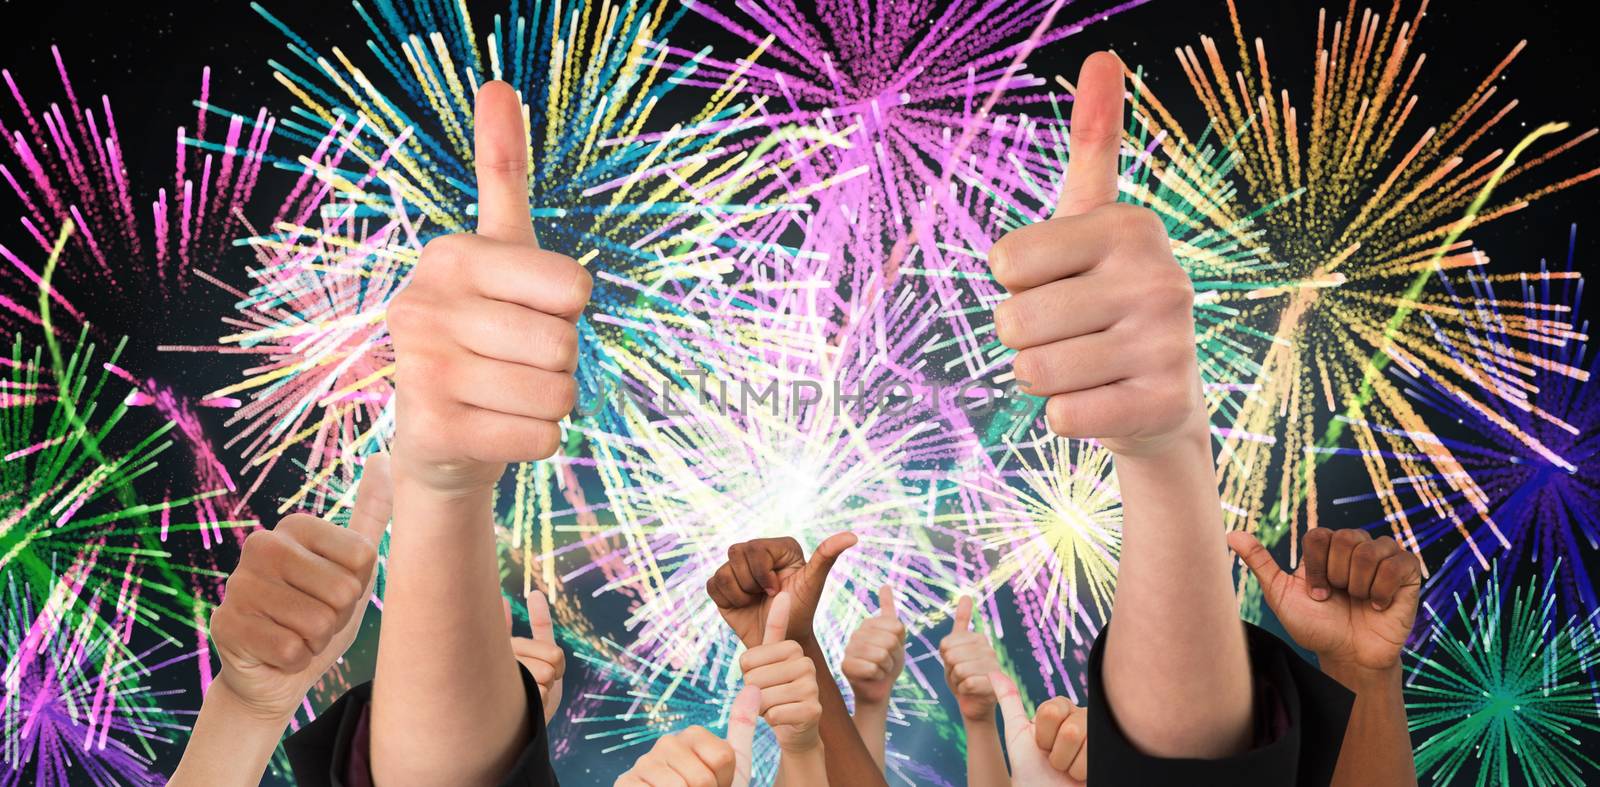 Hands showing thumbs up against digitally generated bright firework design